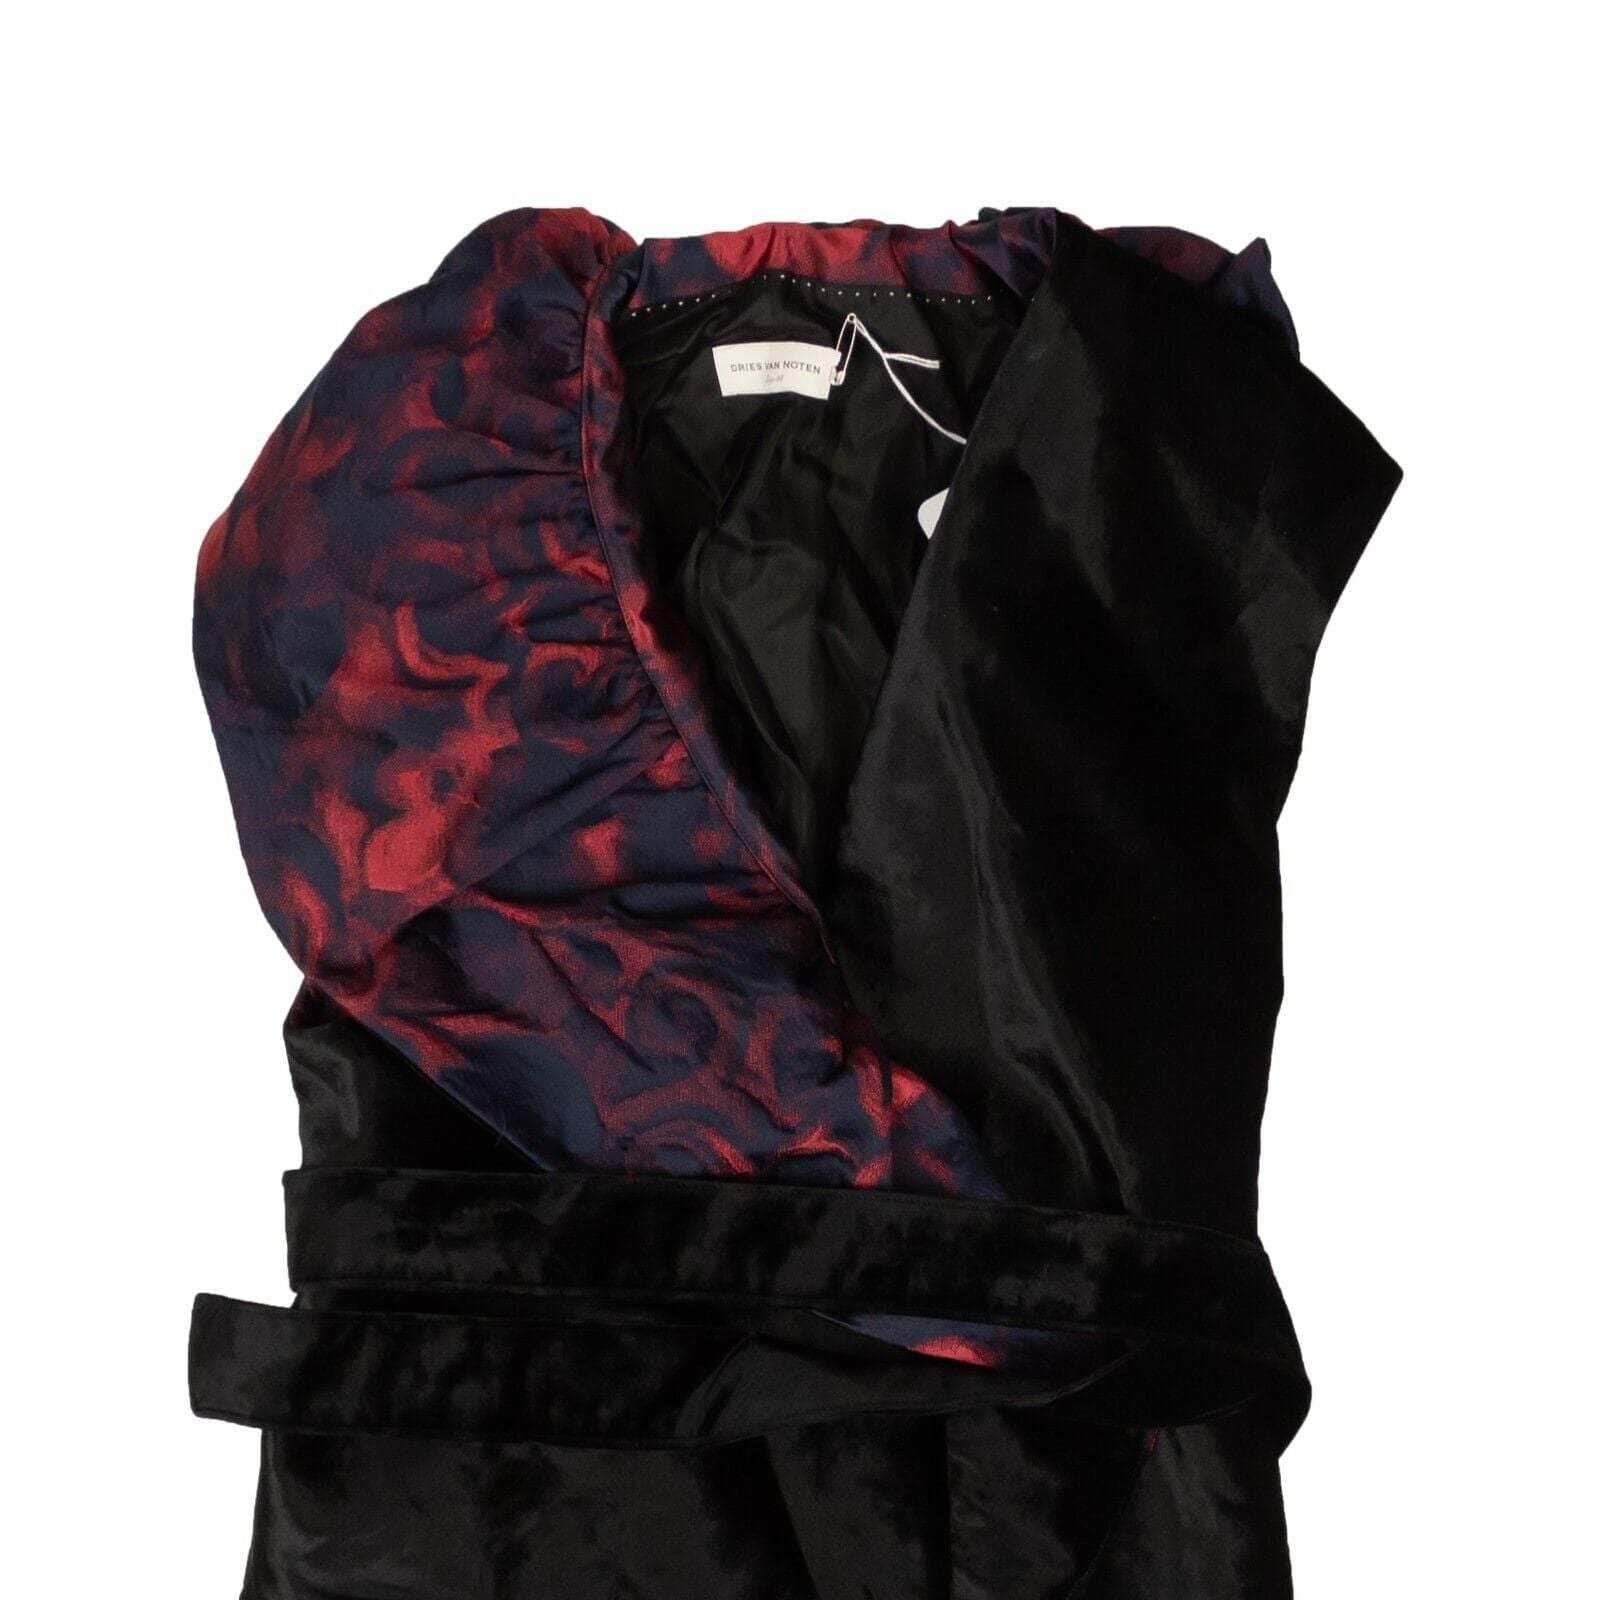 Dries Van Noten 750-1000, channelenable-all, chicmi, couponcollection, dries-van-noten, gender-womens, main-clothing, size-38, womens-outerwear-vests 38 / 95-DVN-0033/38 Black and Blue/Red Ruffle Jacket Vest 95-DVN-0033/38 95-DVN-0033/38